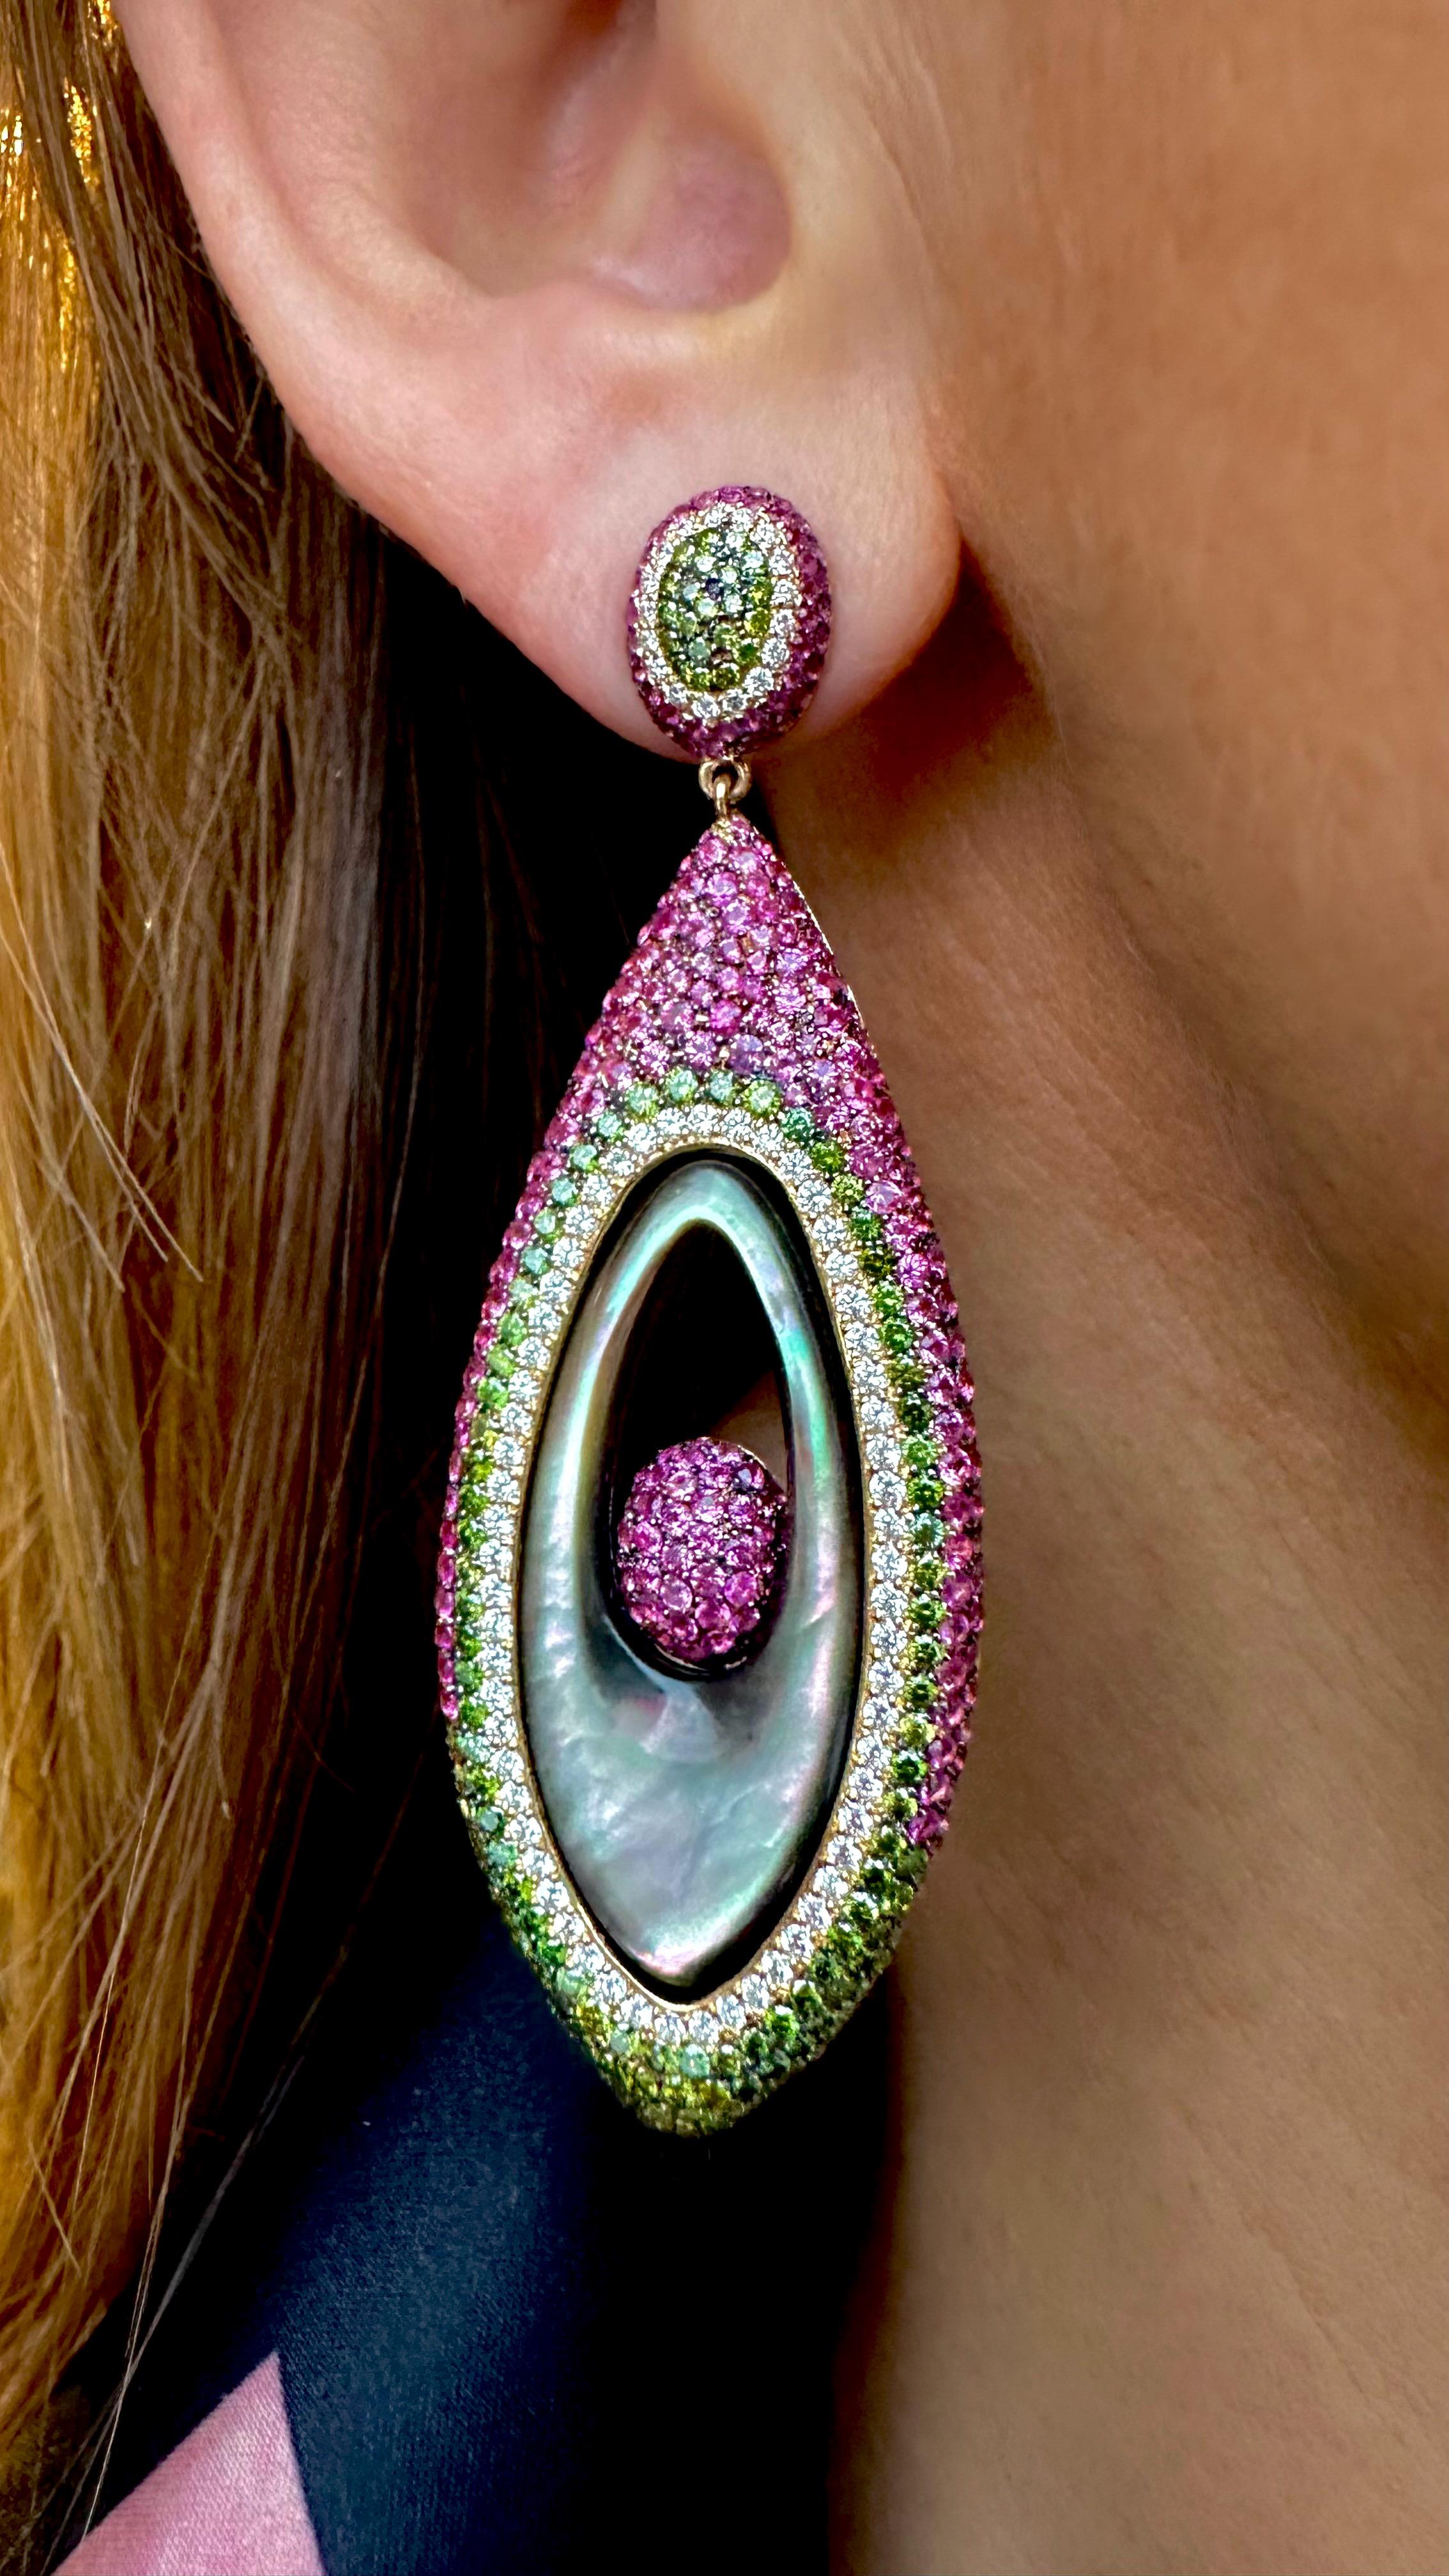 Rosior Long Dangle Earrings set in Yellow Gold, featuring a piece in black mother-of-pearl surrounded by:
- 506 pink sapphires weighing 5,17 ct; 
- 287 green diamonds weighing 2,65 ct;
- 156 natural diamonds (F color, VVS clarity) weighing 1,25